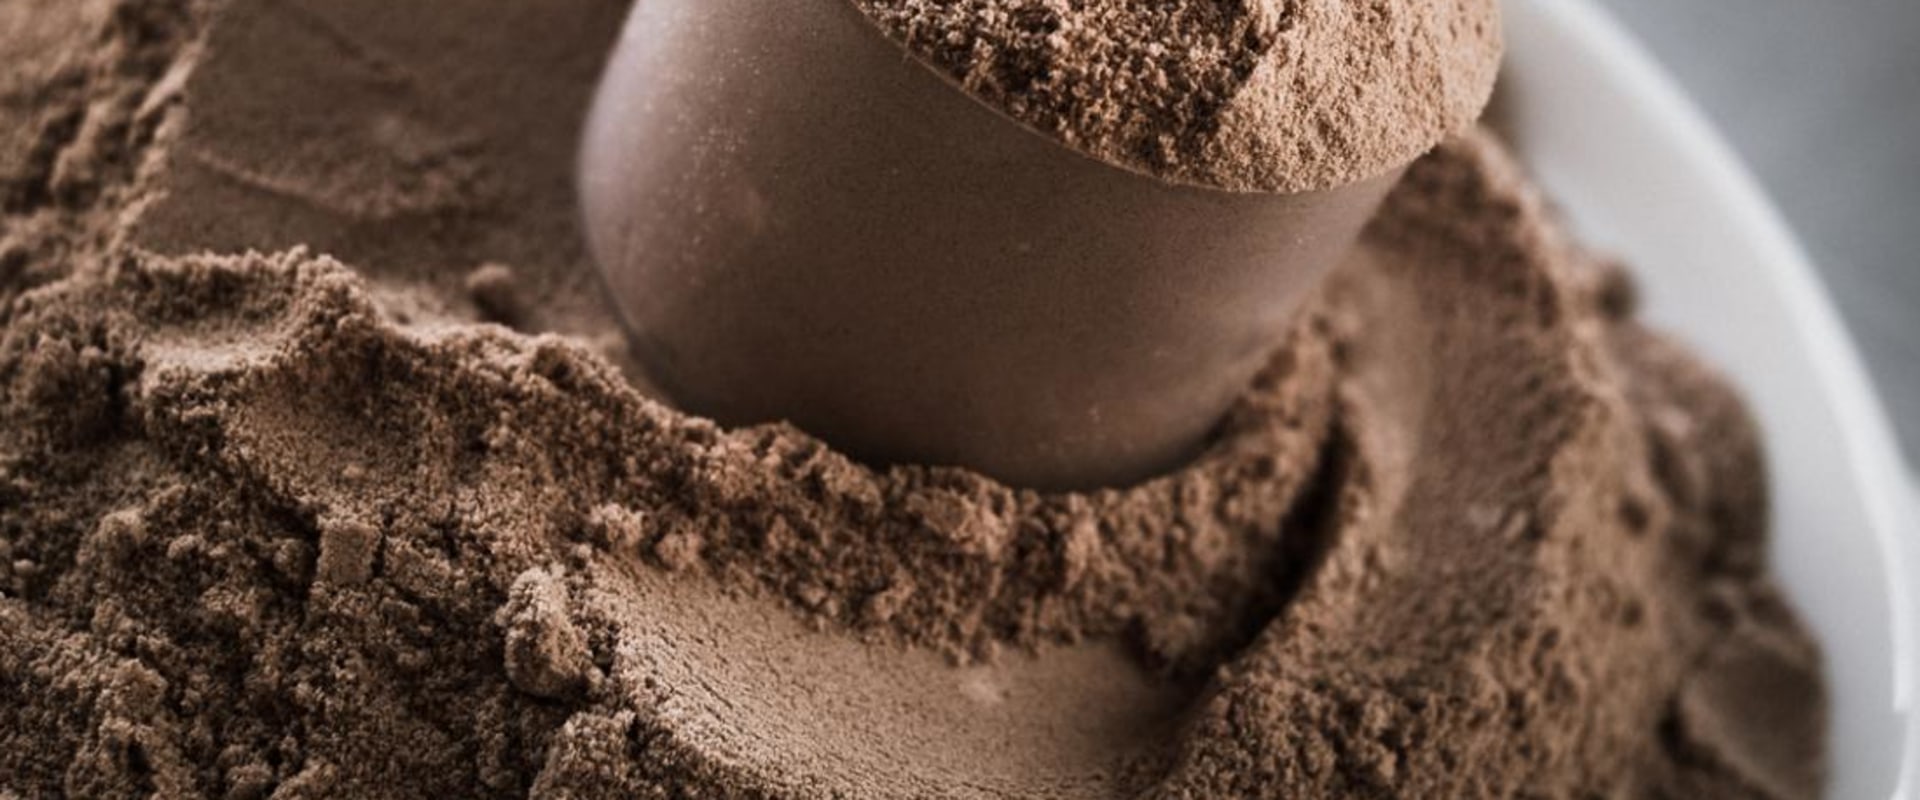 How Much Whey Protein Can Kids Take Safely? - An Expert's Guide